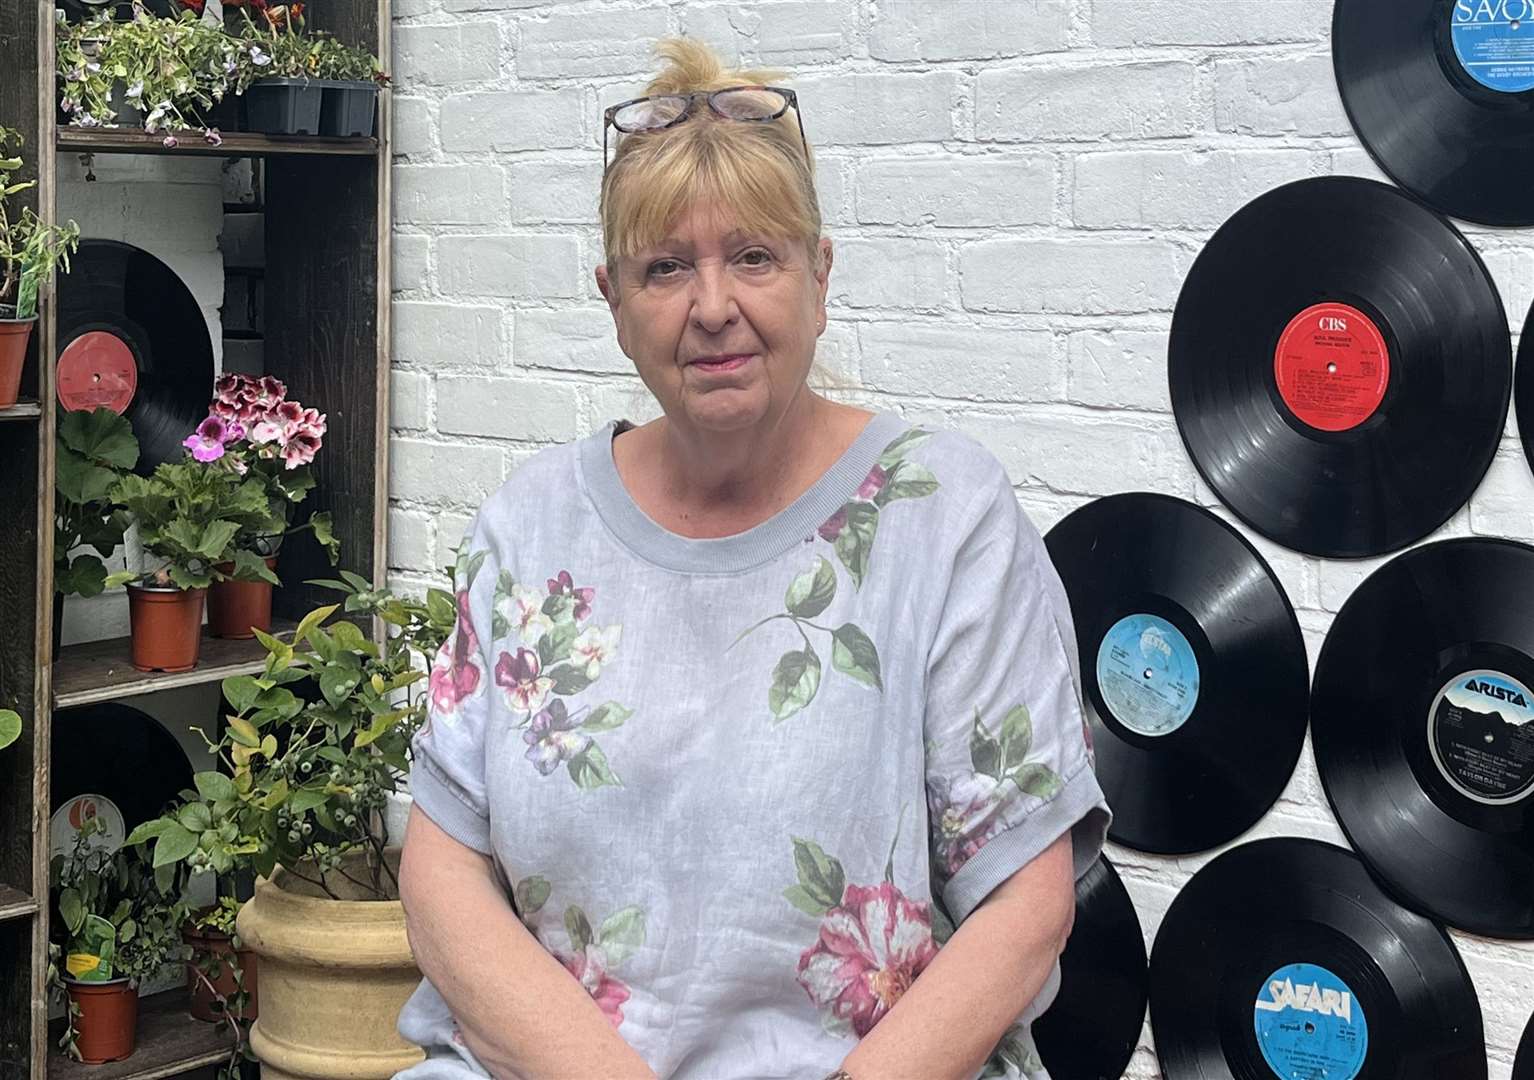 Kay Ashe, 68, is one member of the Whitstable community who participates in the groups offered at Revival Food and Mood and is worried about the impact the development will have on their space